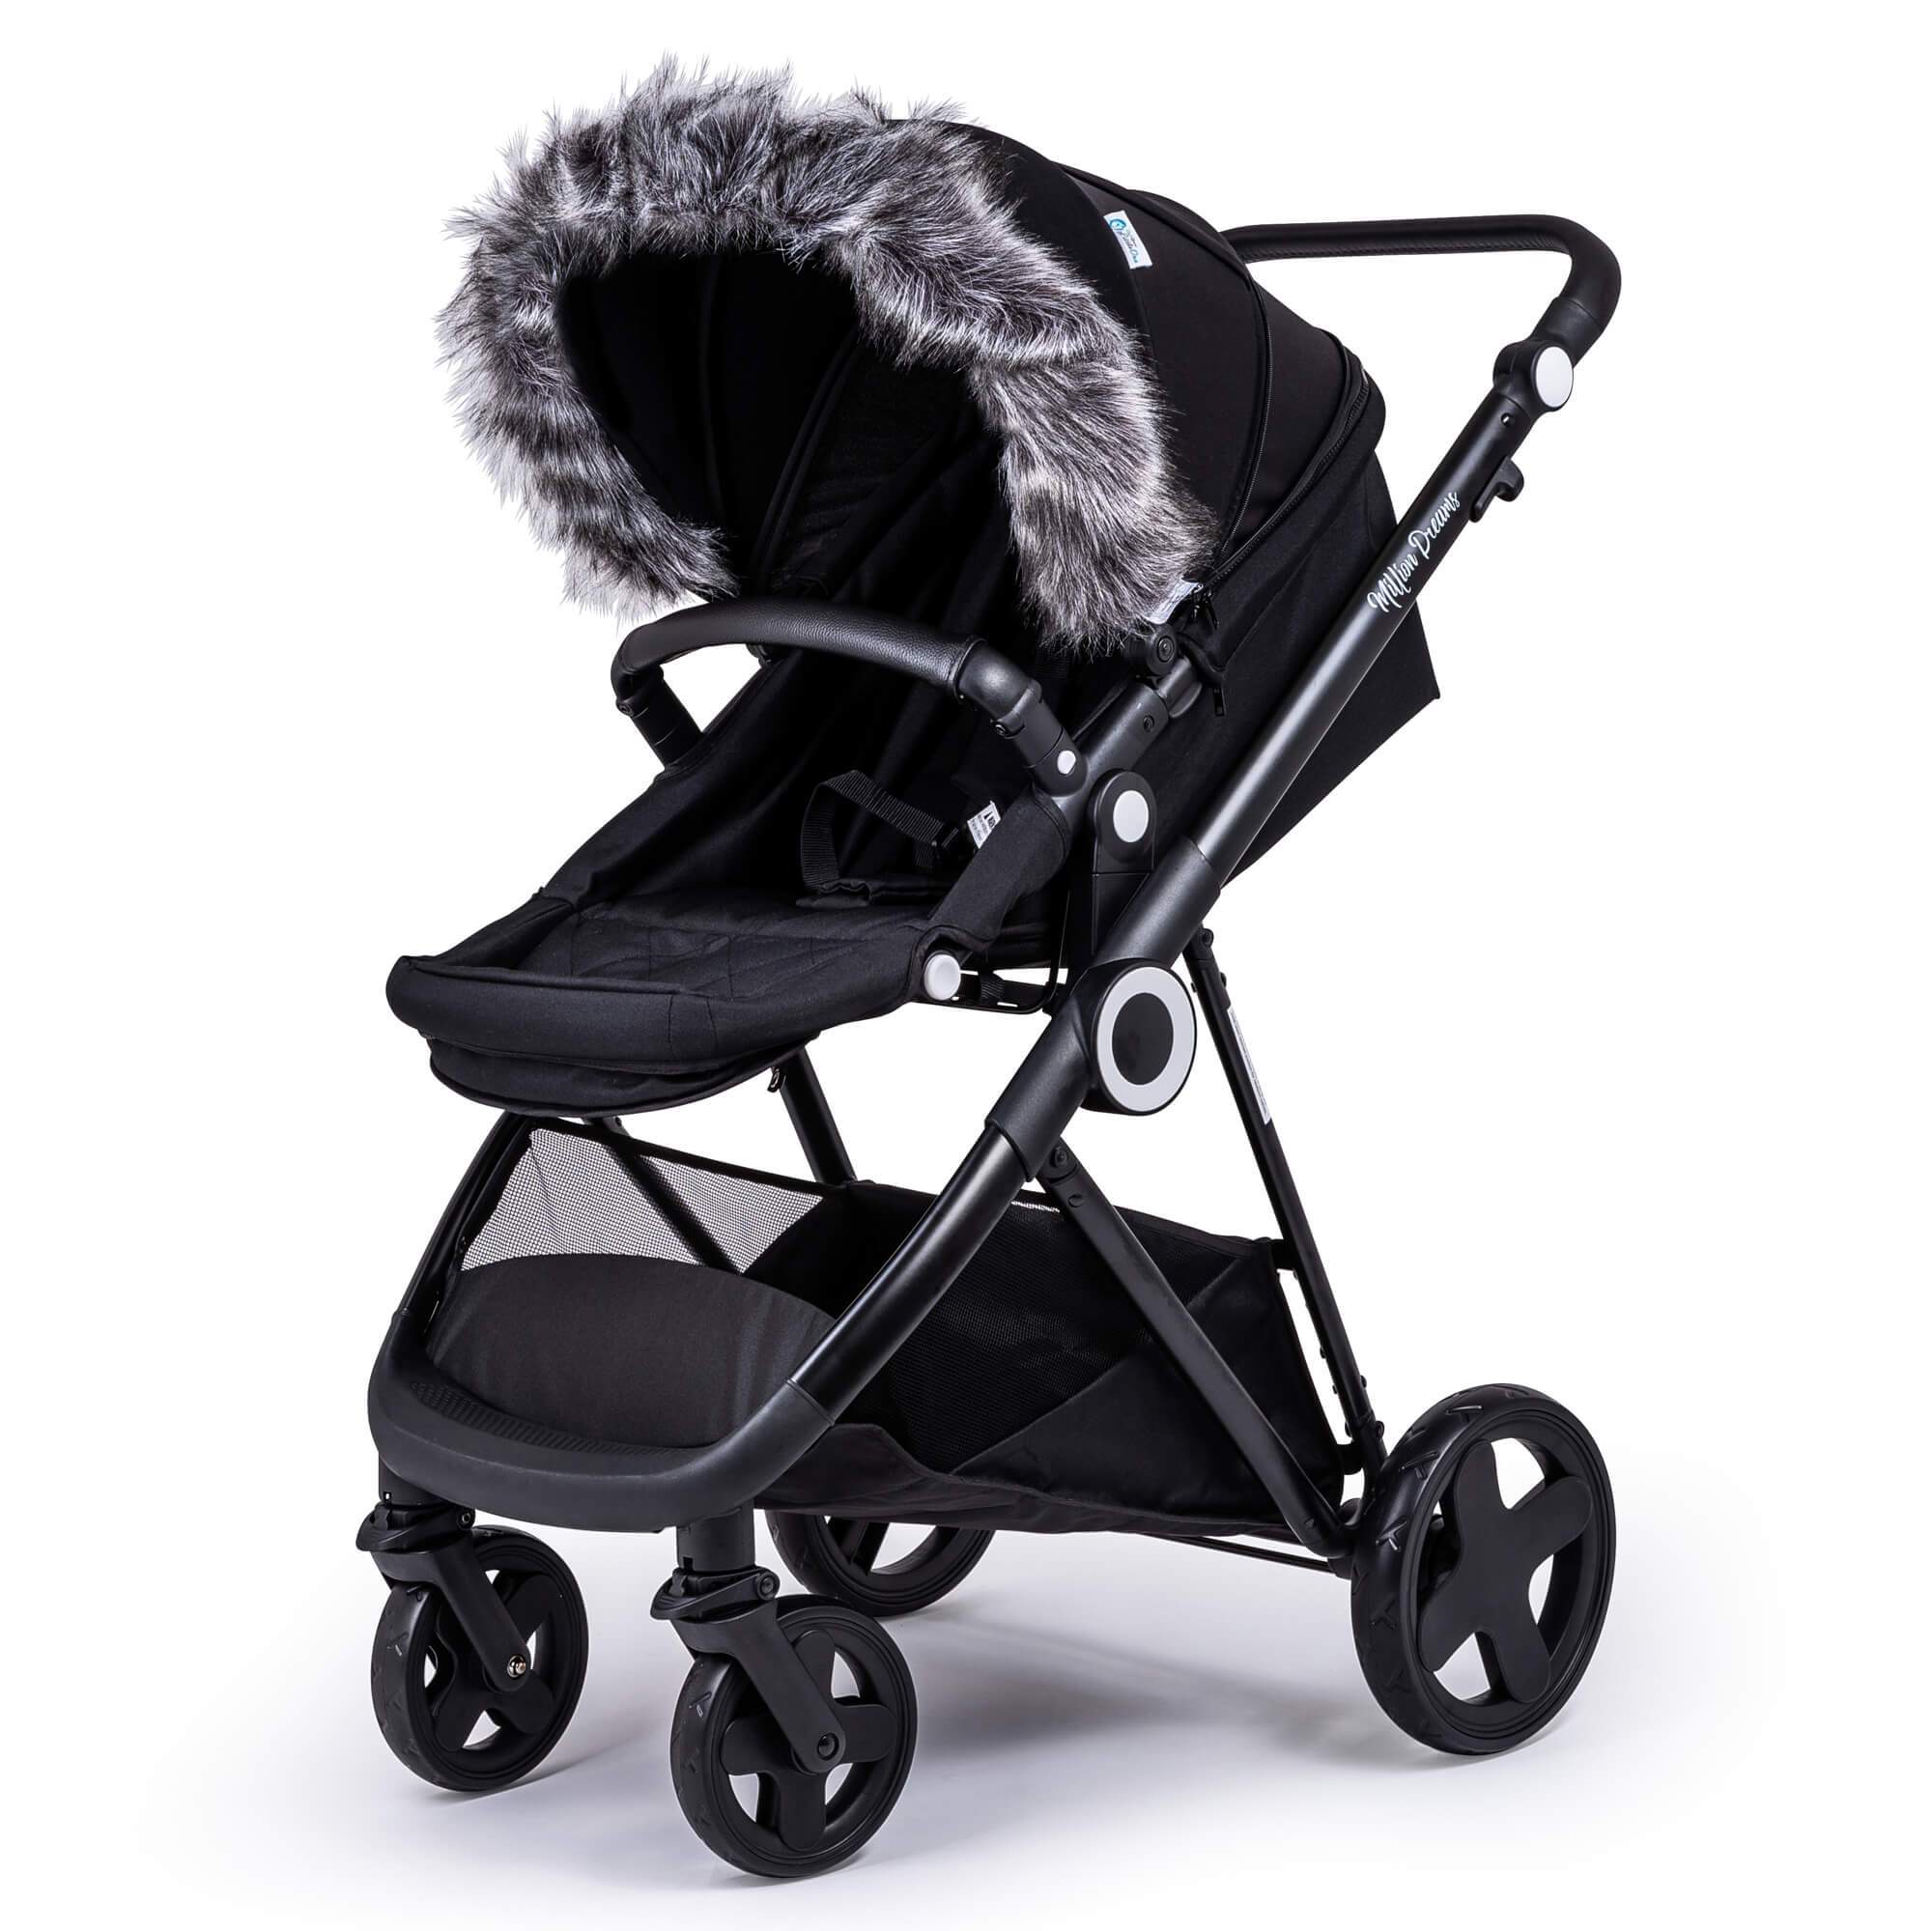 Pram Fur Hood Trim Attachment for Pushchair Compatible with Formula - Dark Grey / Fits All Models | For Your Little One